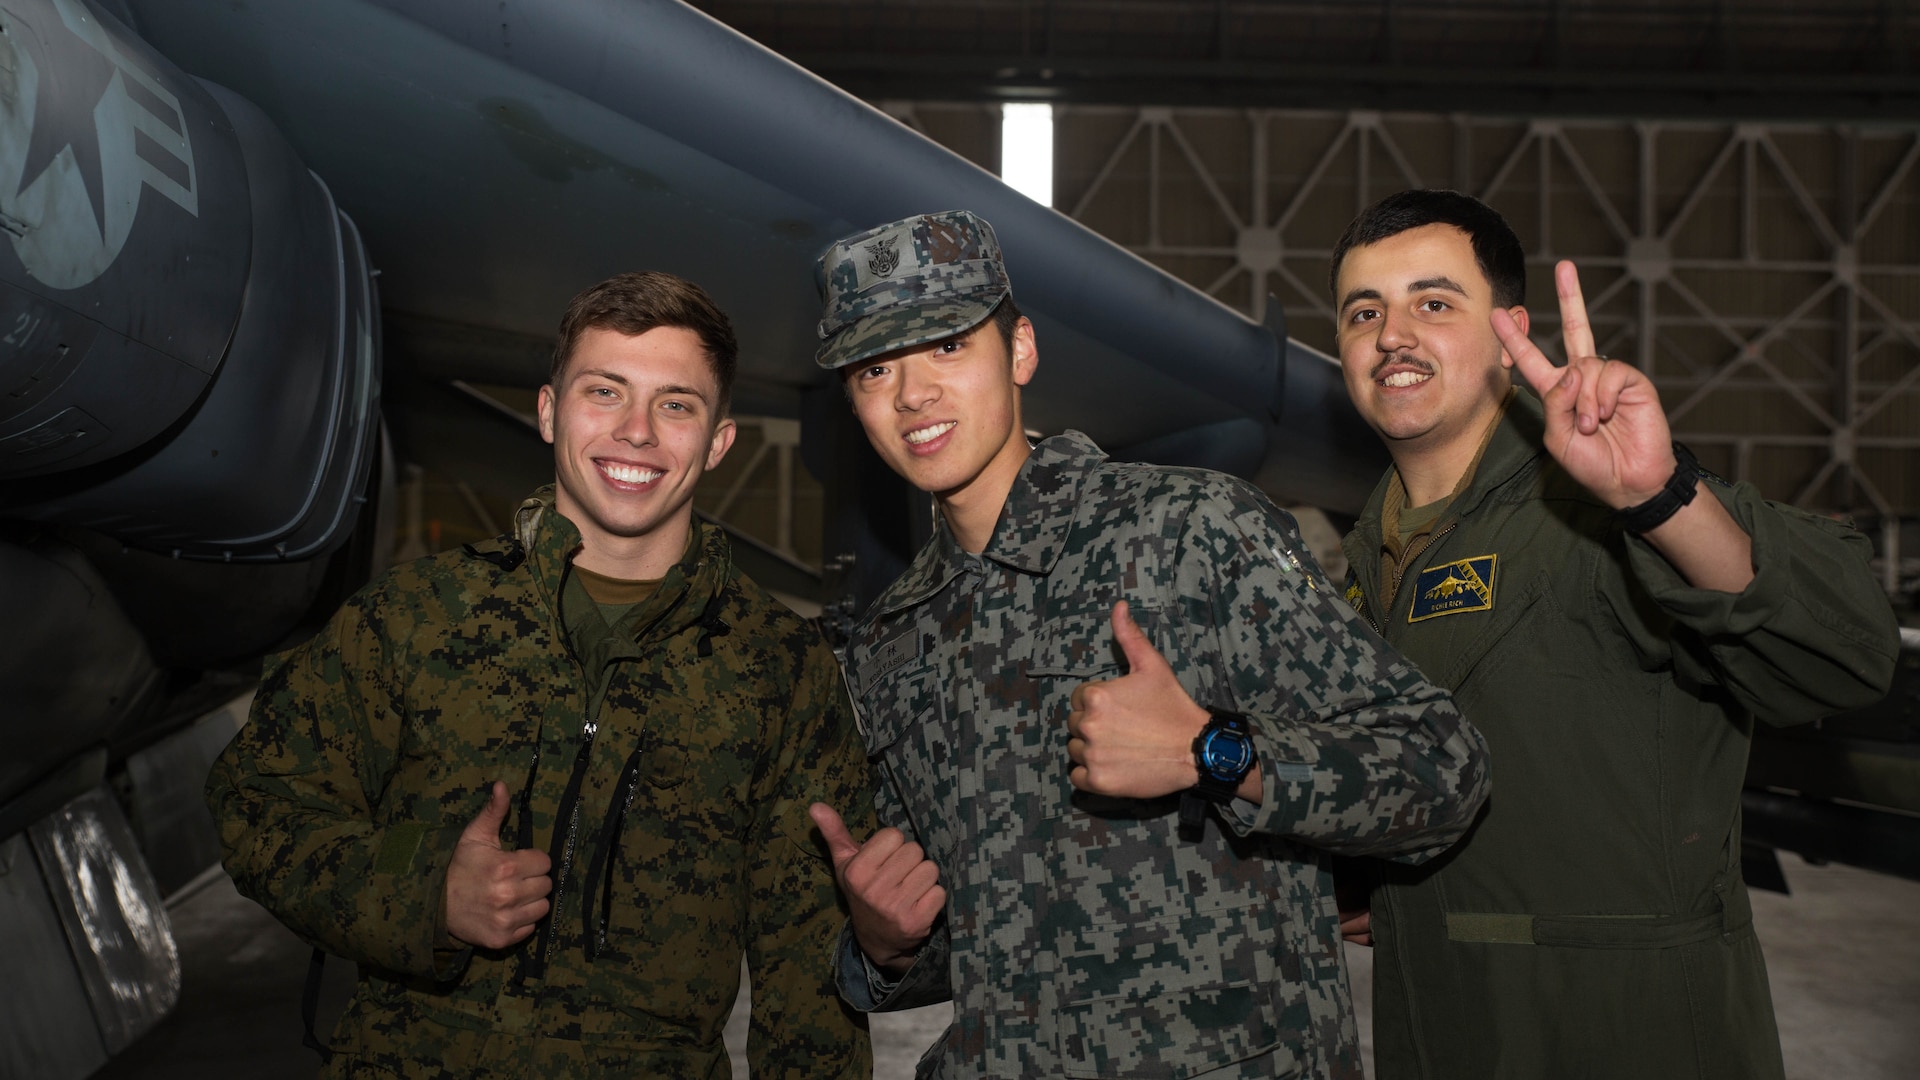 U.S. Marine Corps Lance Cpls. Austin Nazworth, left, and Breht Urzua, right, power line technicians with Marine Attack Squadron (VMA) 542, pose for a photo with a member of the Japan Air Self Defense Force at Chitose Air Base, Japan, Dec. 9, 2016. JASDF personnel joined the VMA-542 Marines in their hangar to get a closer look and better understanding of the squadrons Harriers. (U.S. Marine Corps photo by Lance Cpl. Joseph Abrego)